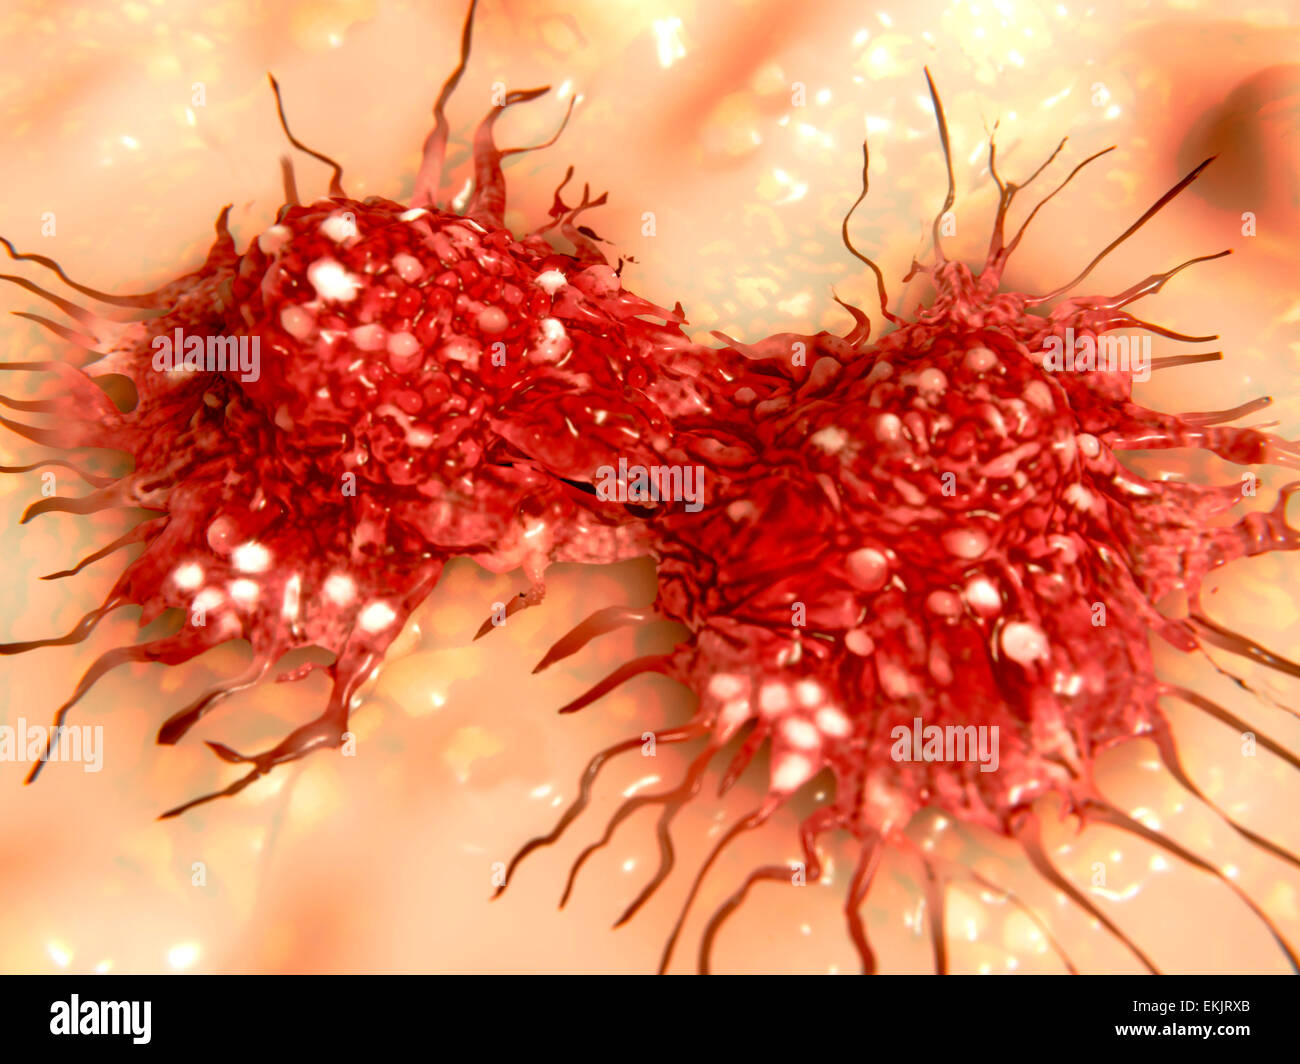 cancer, cancer cell, cancerous, cells, disease, dividing, division, healthcare, malignant, medical, oncology, proliferation, biomedical illustration, growth, tumor, tissue, cell division, mitosis, illustration, artwork Stock Photo